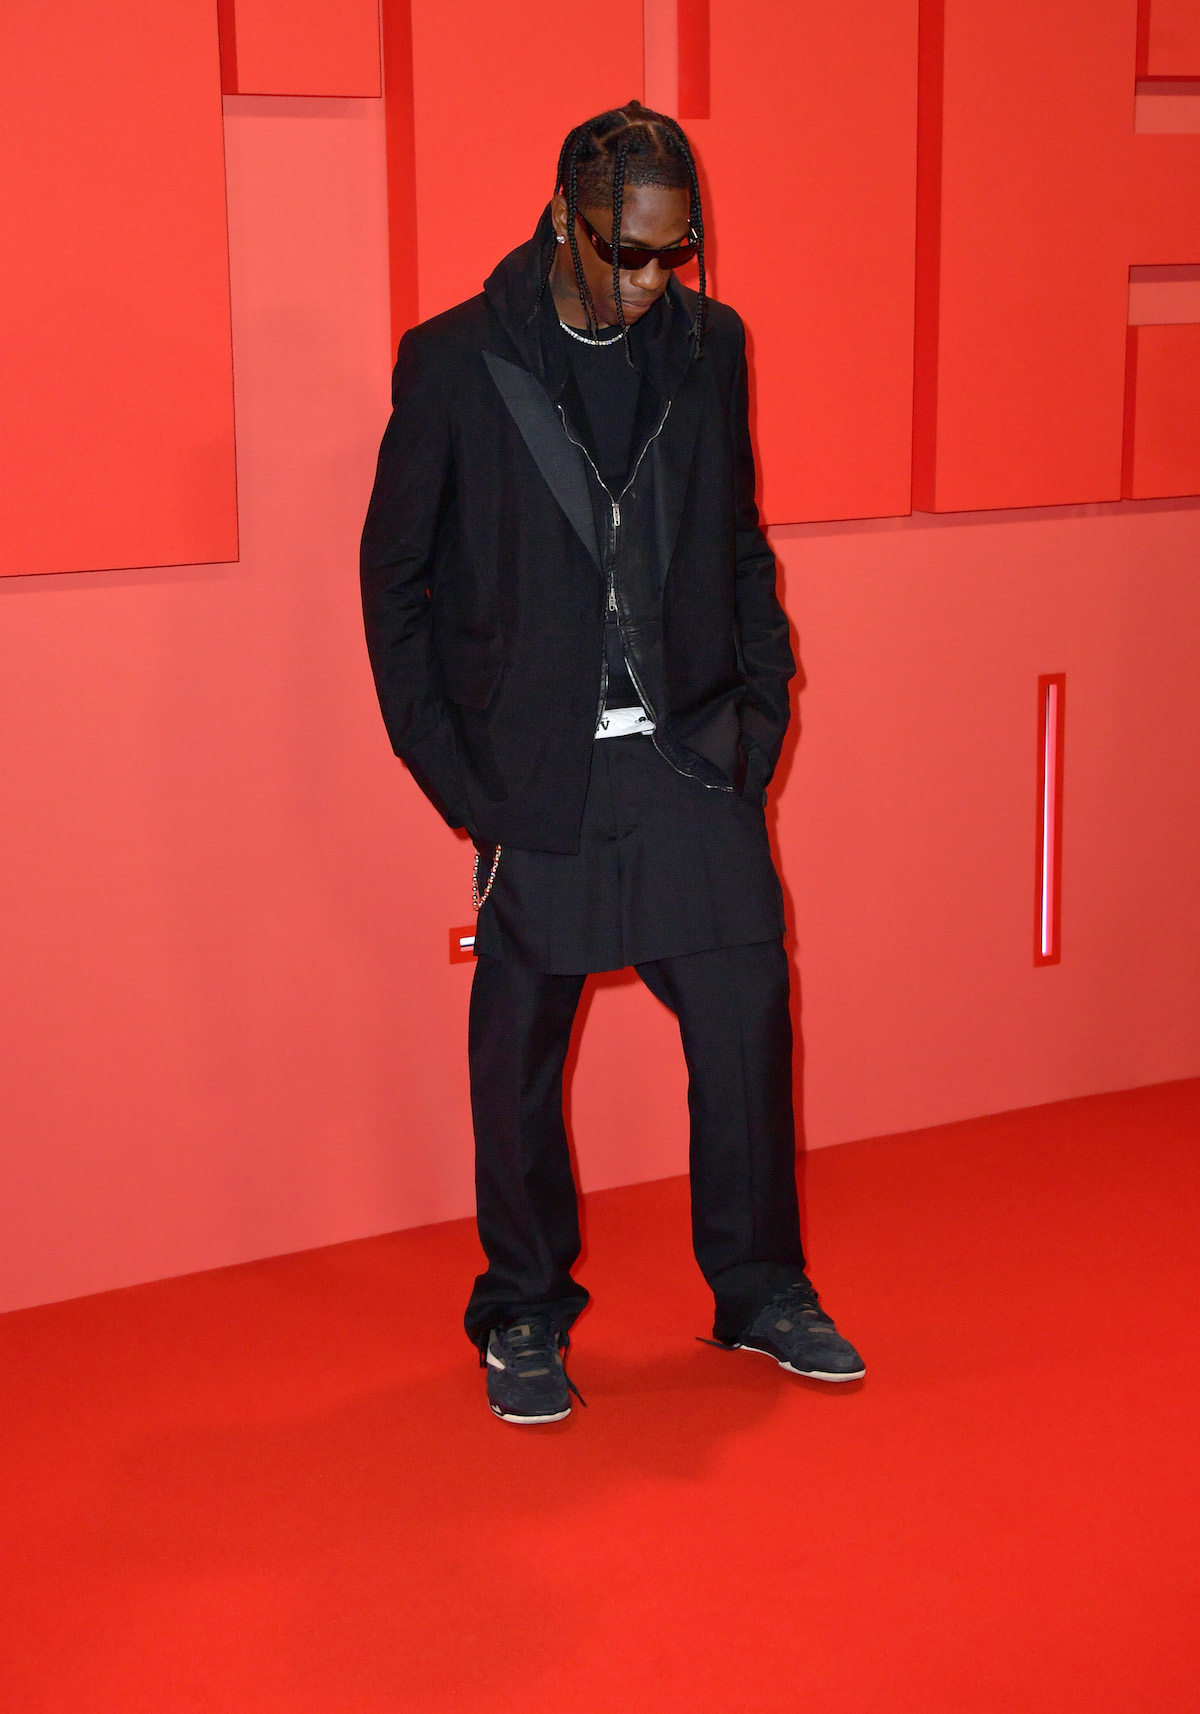 Travis Scott debuts potential new Nike collaboration at Cannes